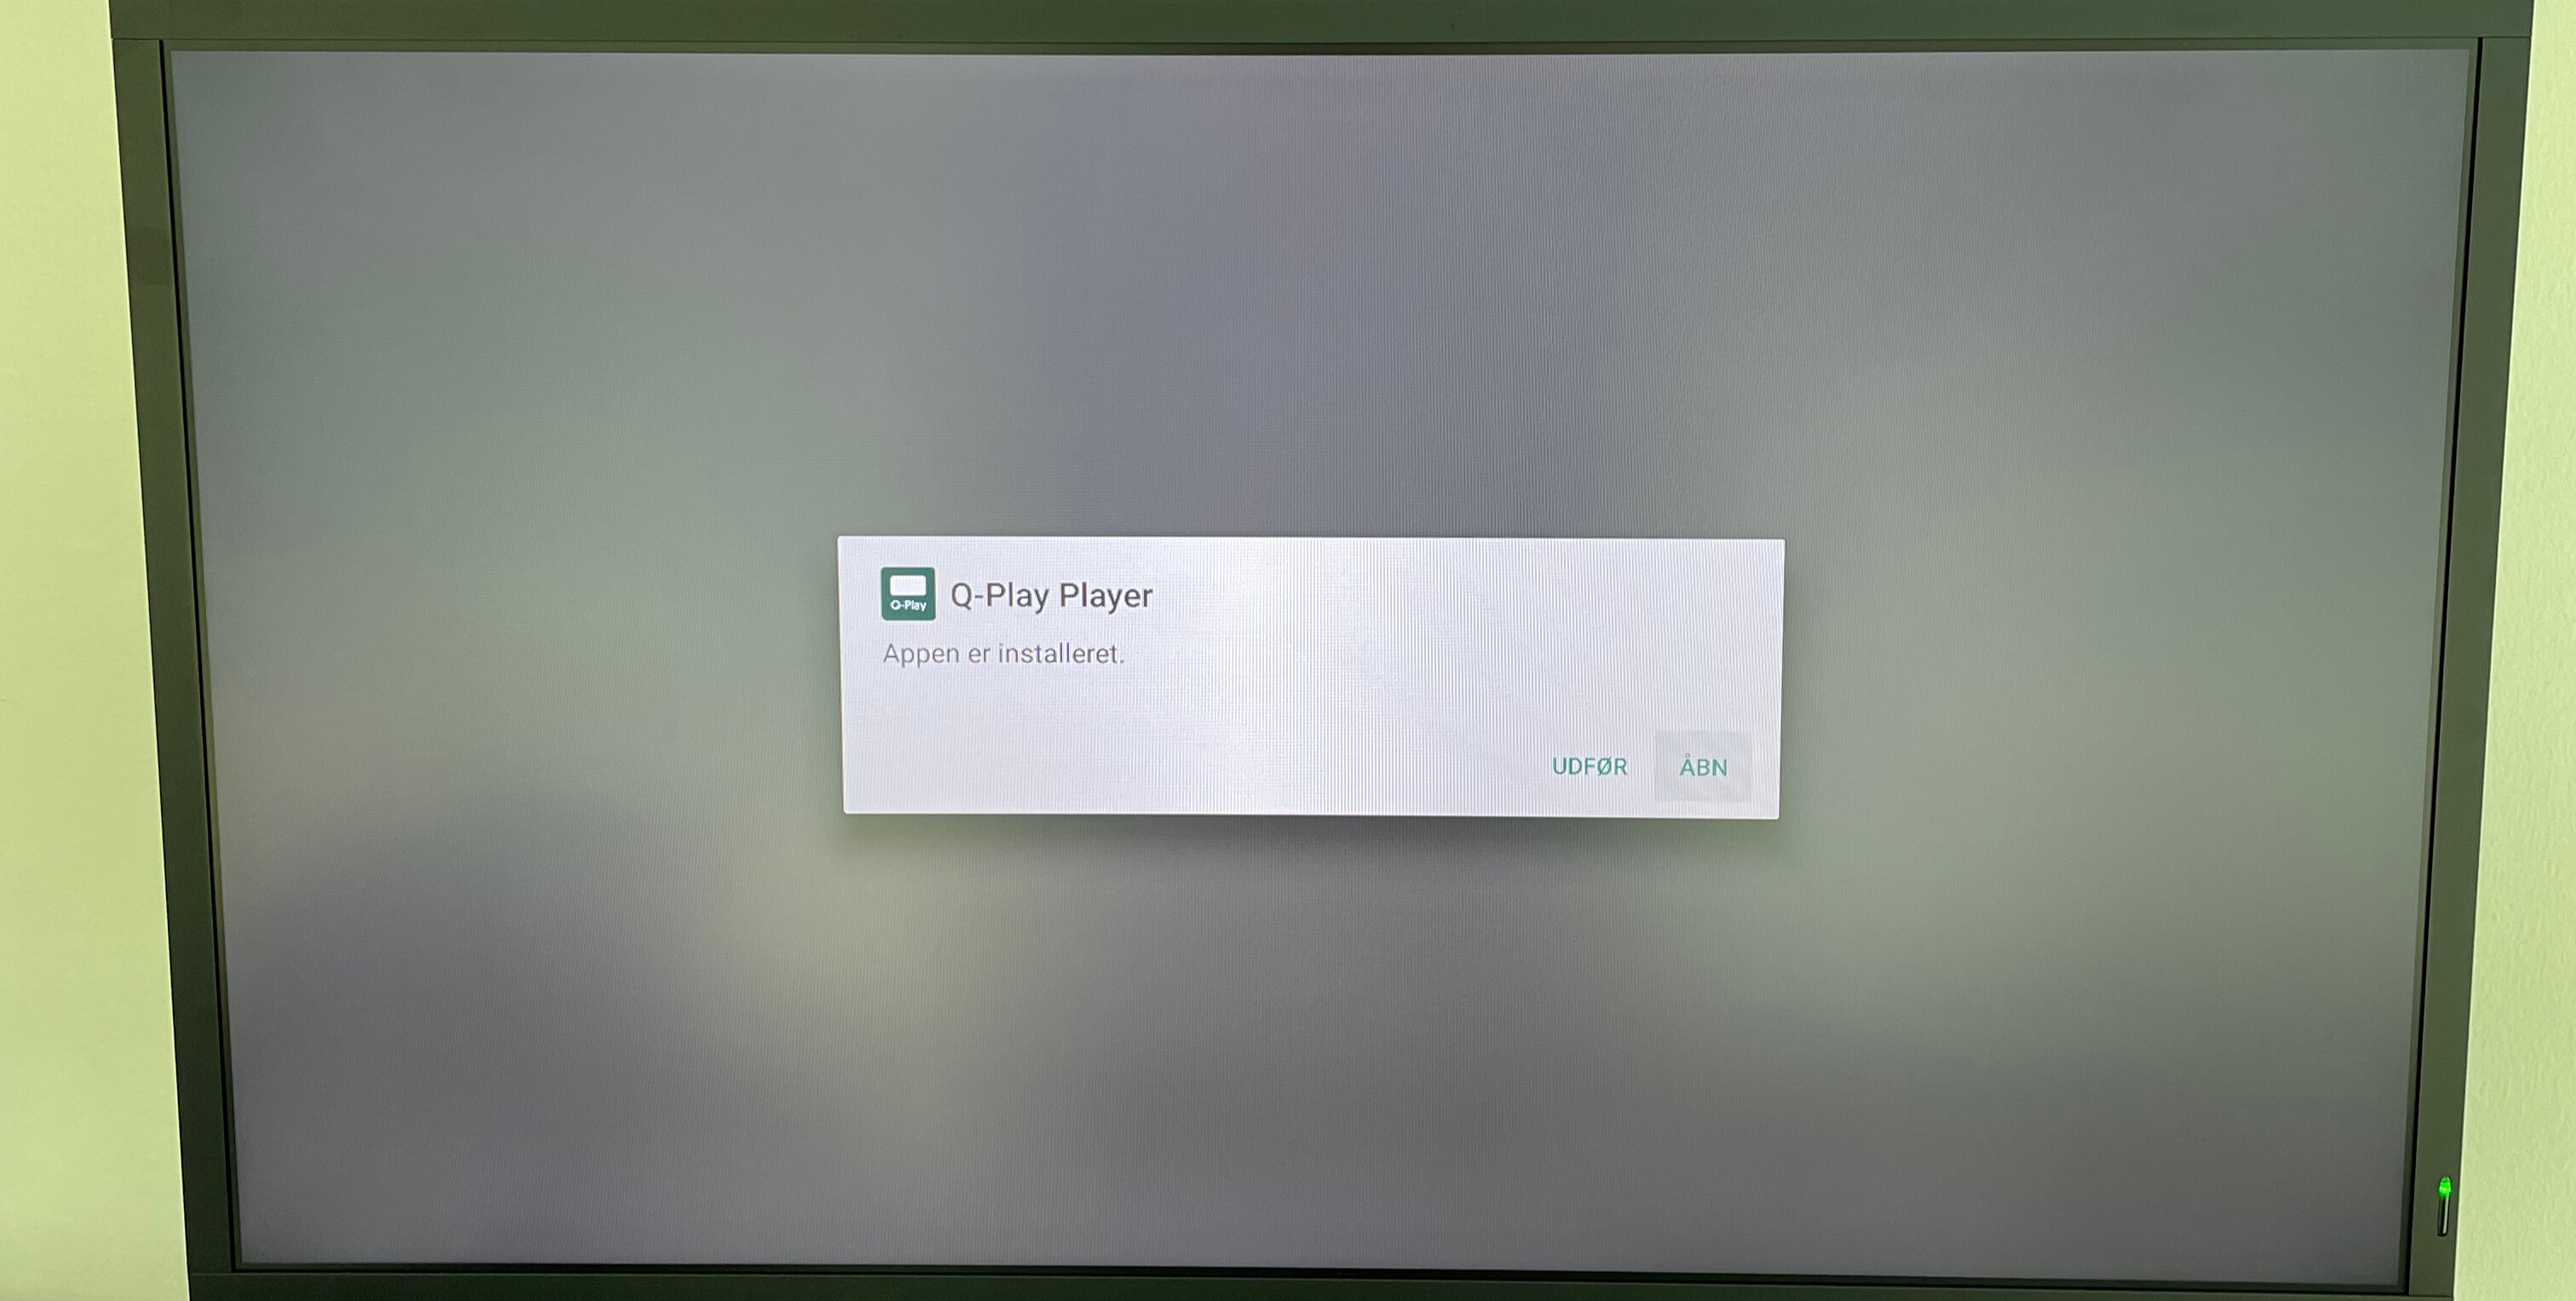 Notification on screen displaying 'Q-Play Player Appen er installeret' with options 'UDFØR' and 'ÅBN'.